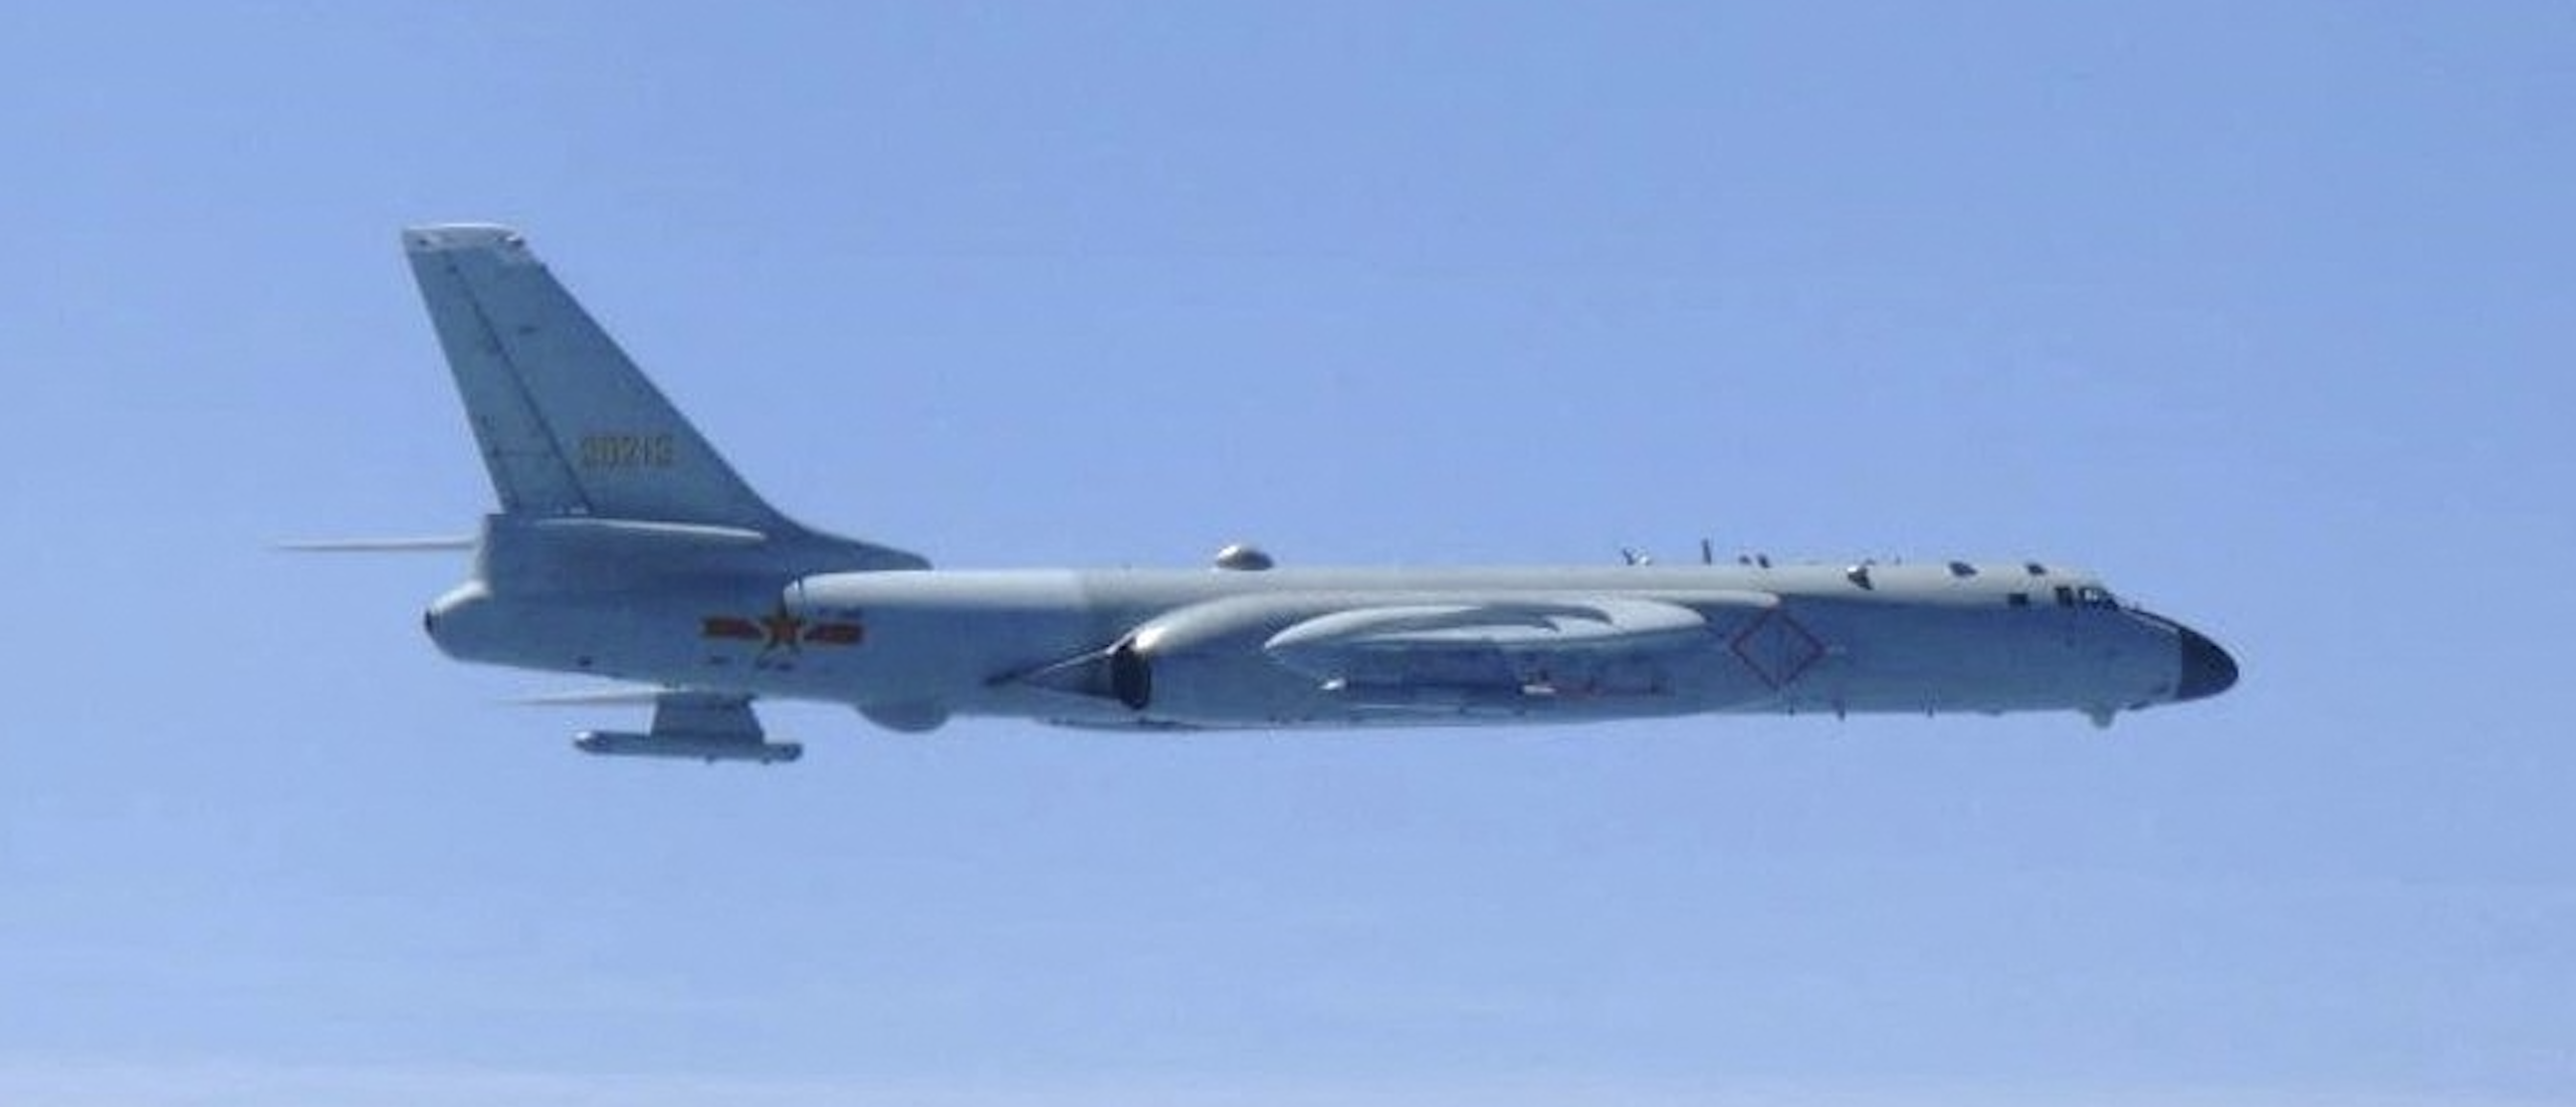 A Chinese H-6 bomber flies over East China Sea in this handout picture taken by Japan Air Self-Defence Force and released by the Joint Staff Office of the Defense Ministry of Japan May 24, 2022. (Joint Staff Office of the Defense Ministry of Japan/HANDOUT via REUTERS)